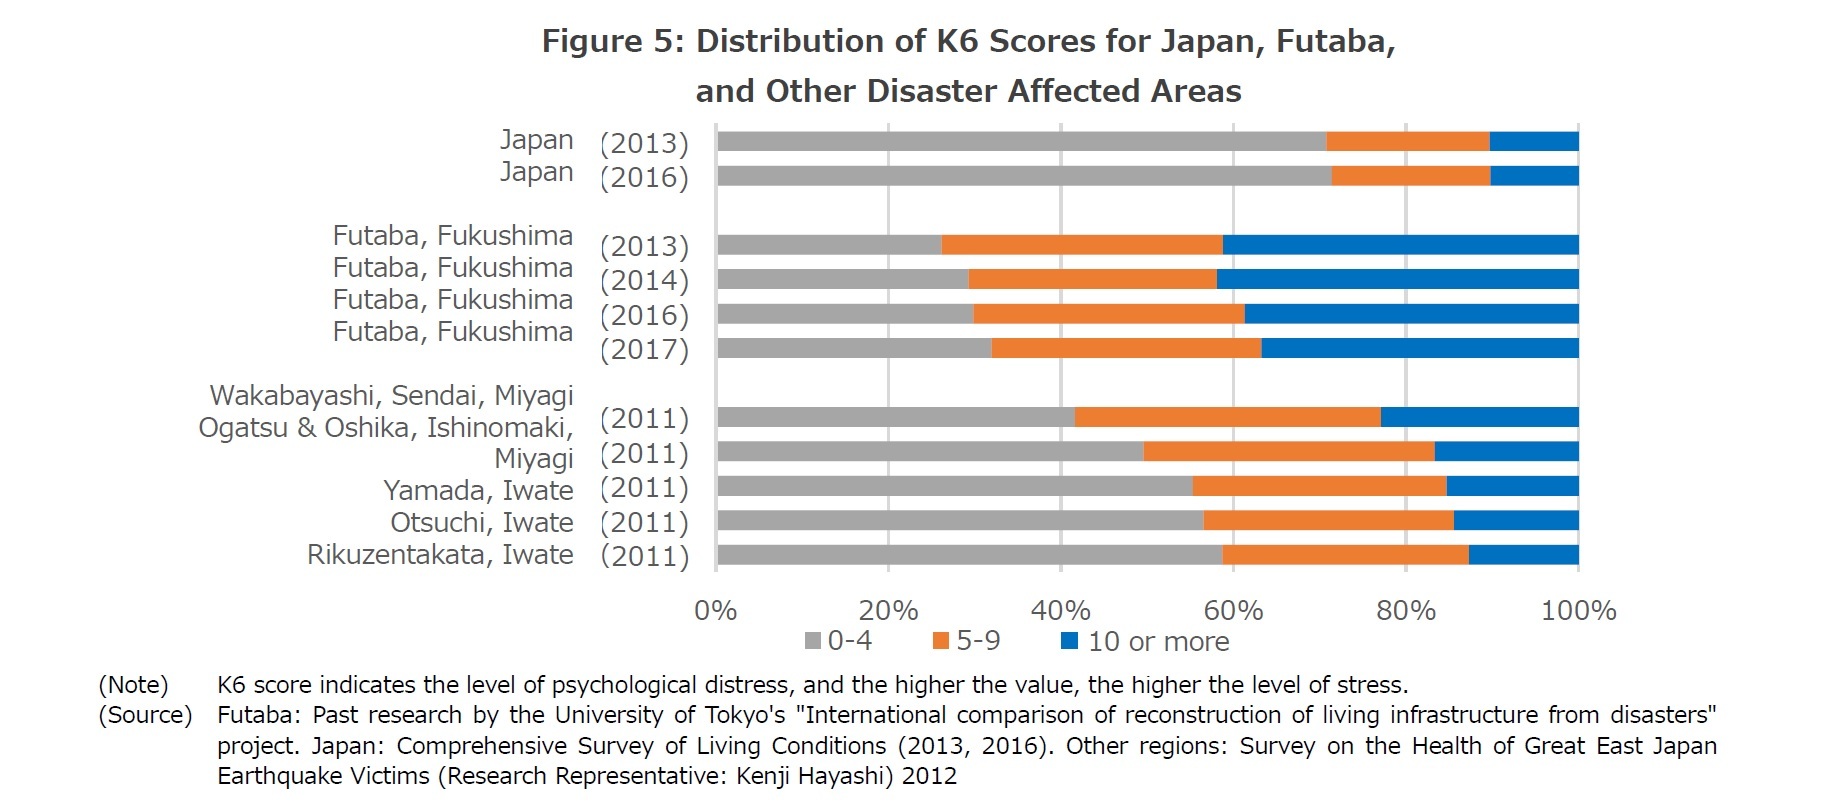 Figure 5: Distribution of K6 Scores for Japan, Futaba, 
and Other Disaster Affected Areas